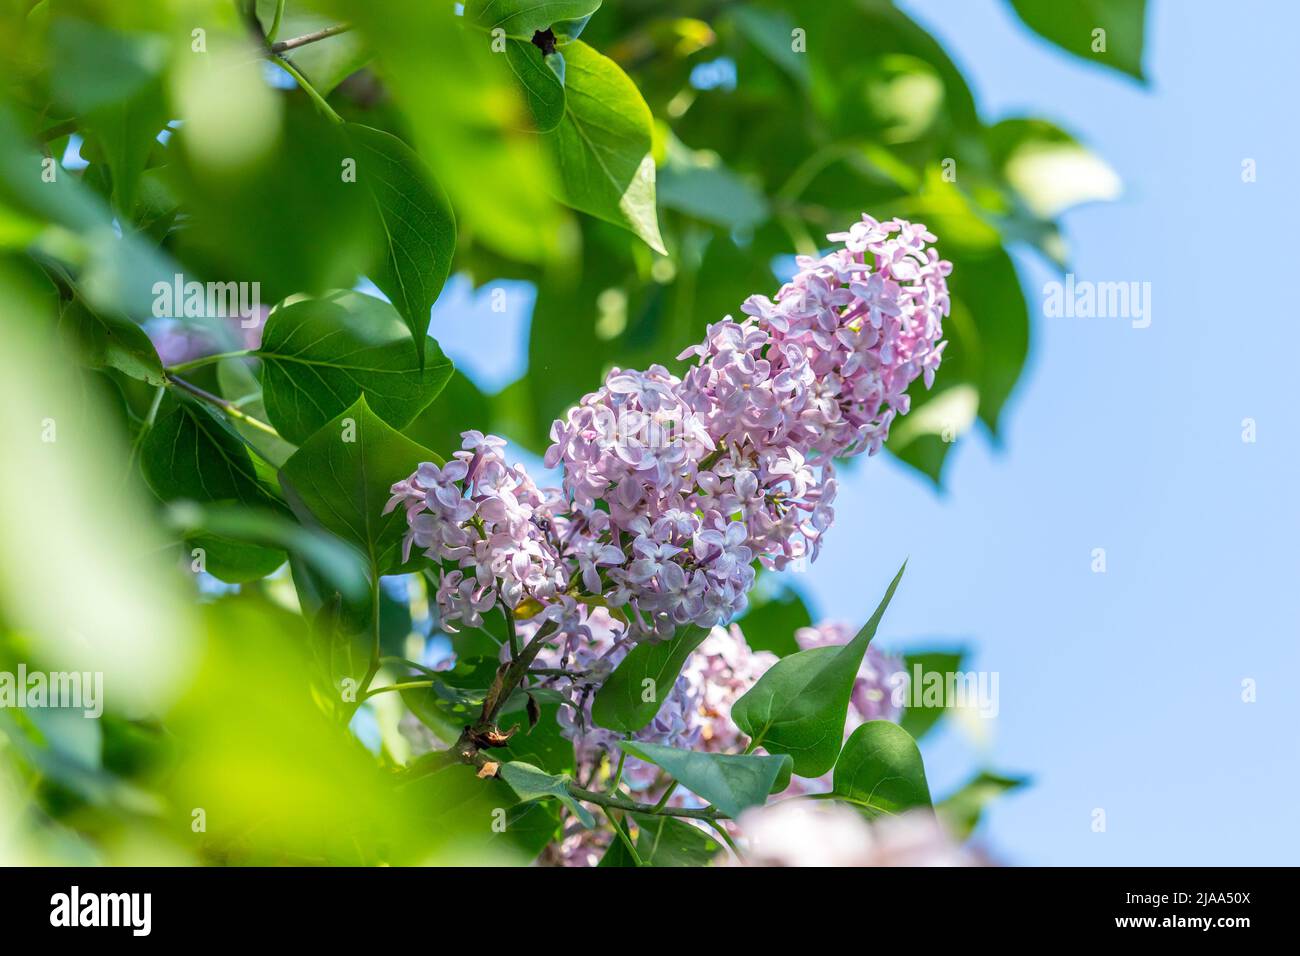 Syringa - light purple blooming lilac flowers with green leaves Stock Photo